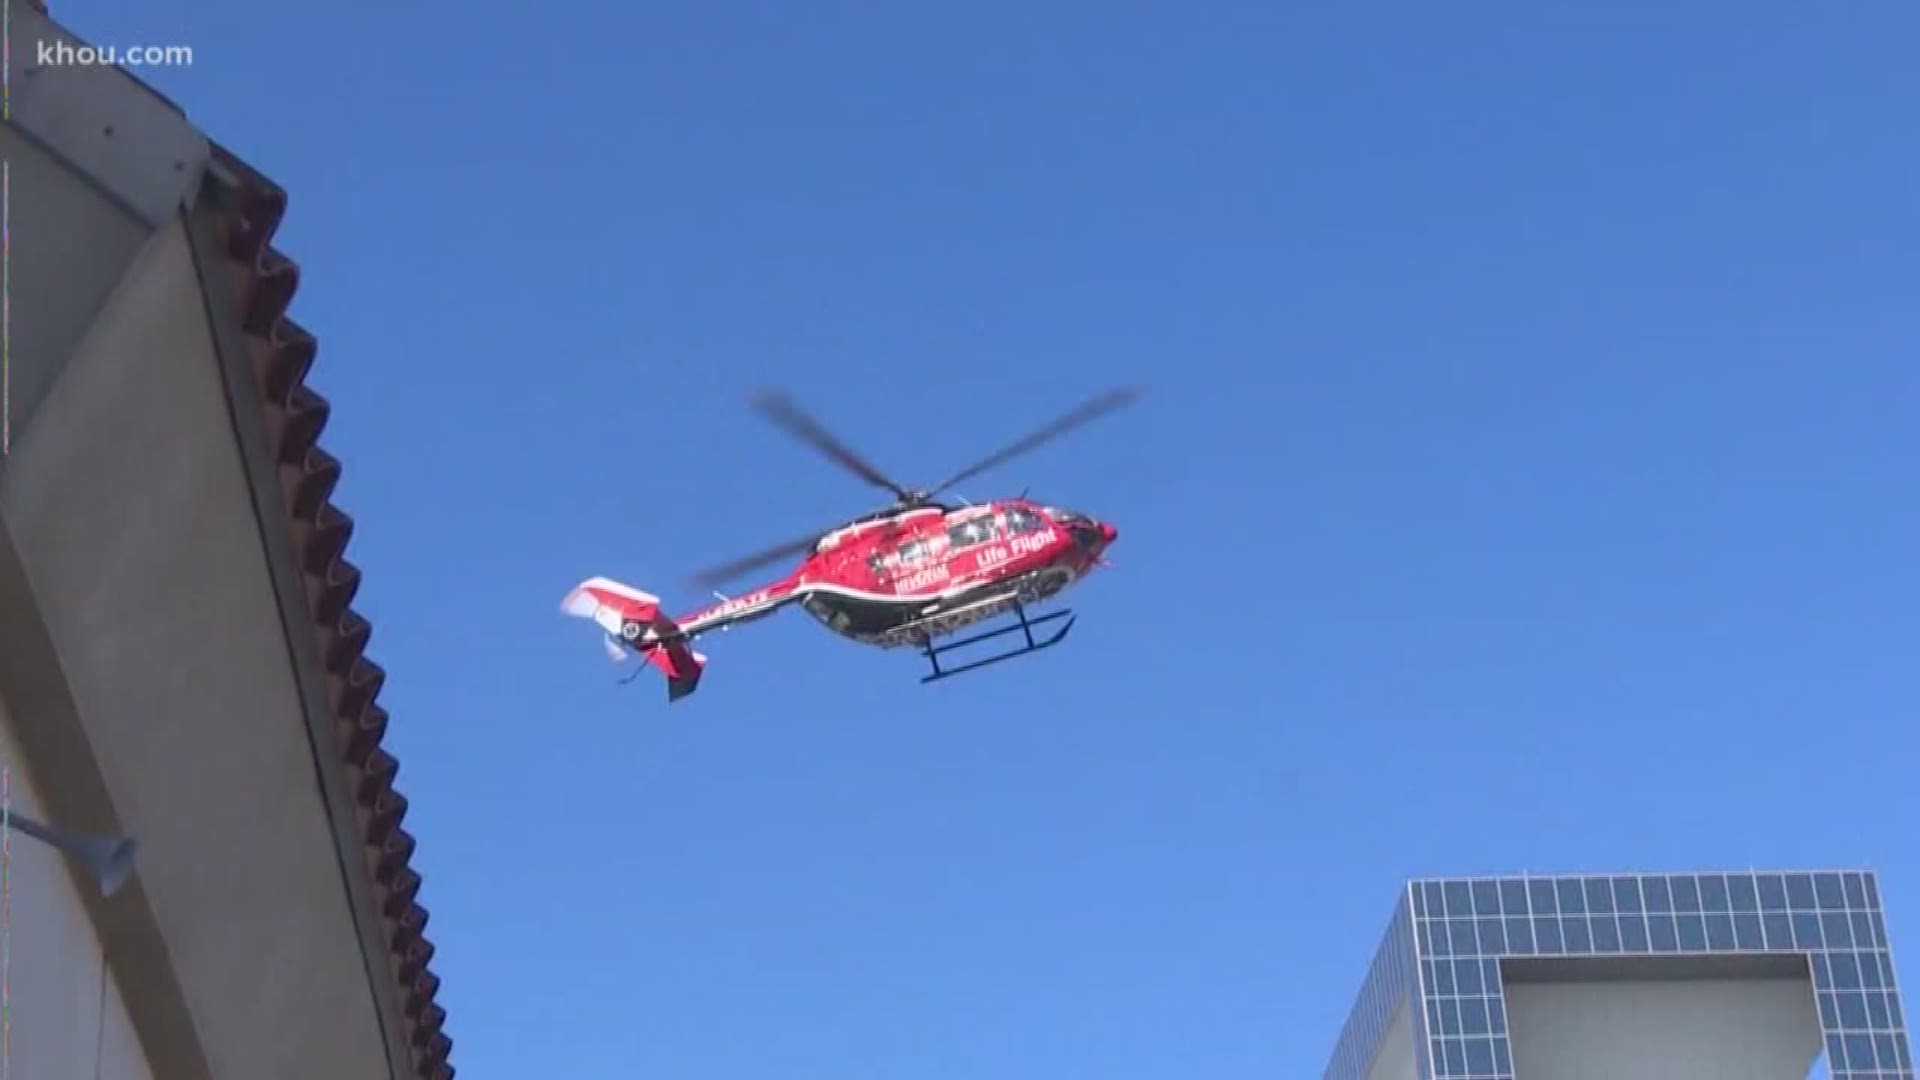 Memorial Hermann's Life Flight program is a safety net for Houston. You’ve seen the choppers flying overhead – transporting patients who need medical attention immediately. In this morning’s Inside Access, Janel Forte takes us a rare glimpse inside the lifesaving program.